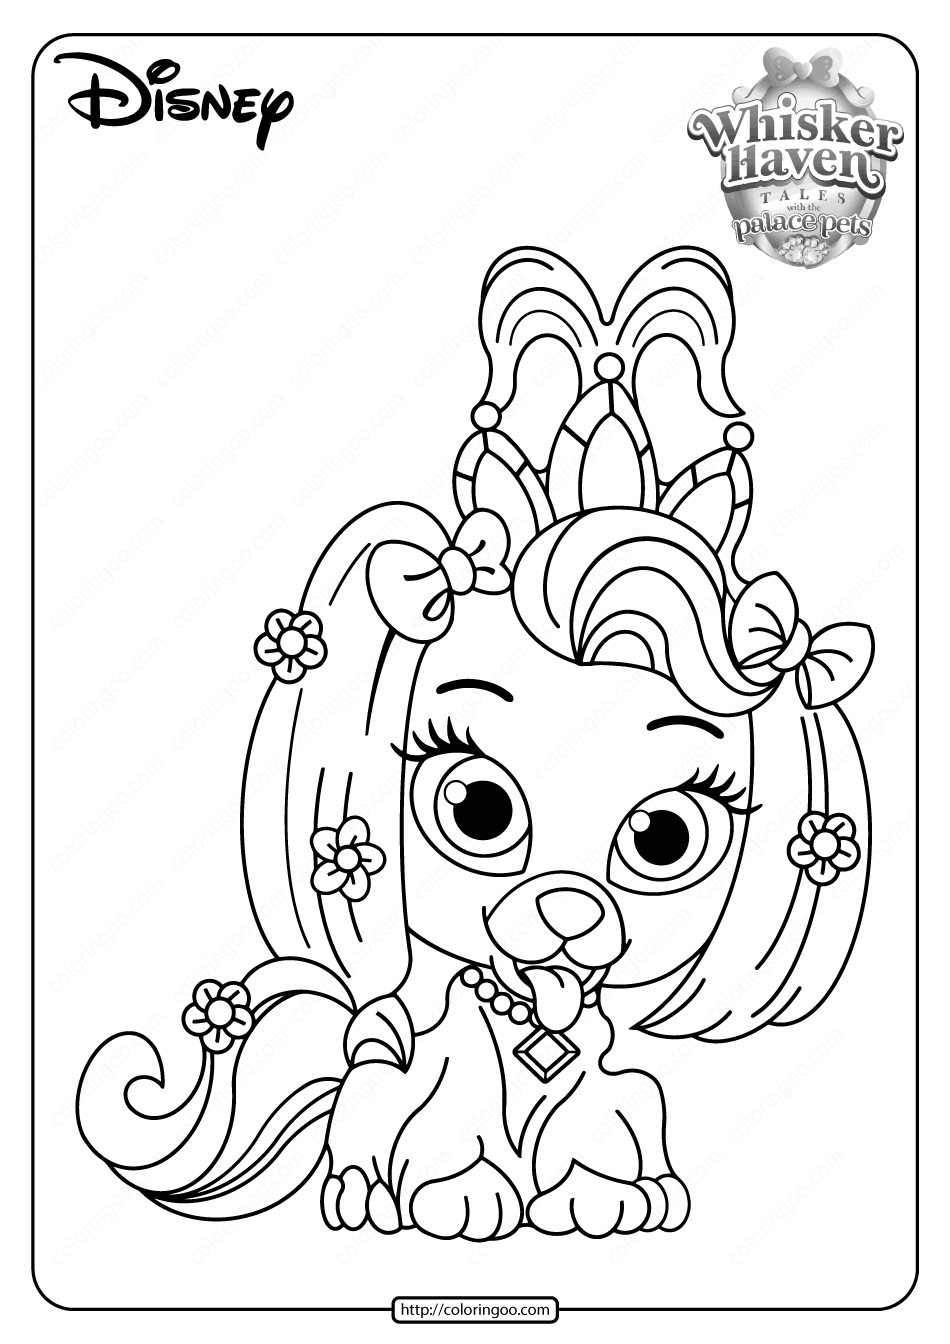 printable palace pets daisy pdf coloring pages